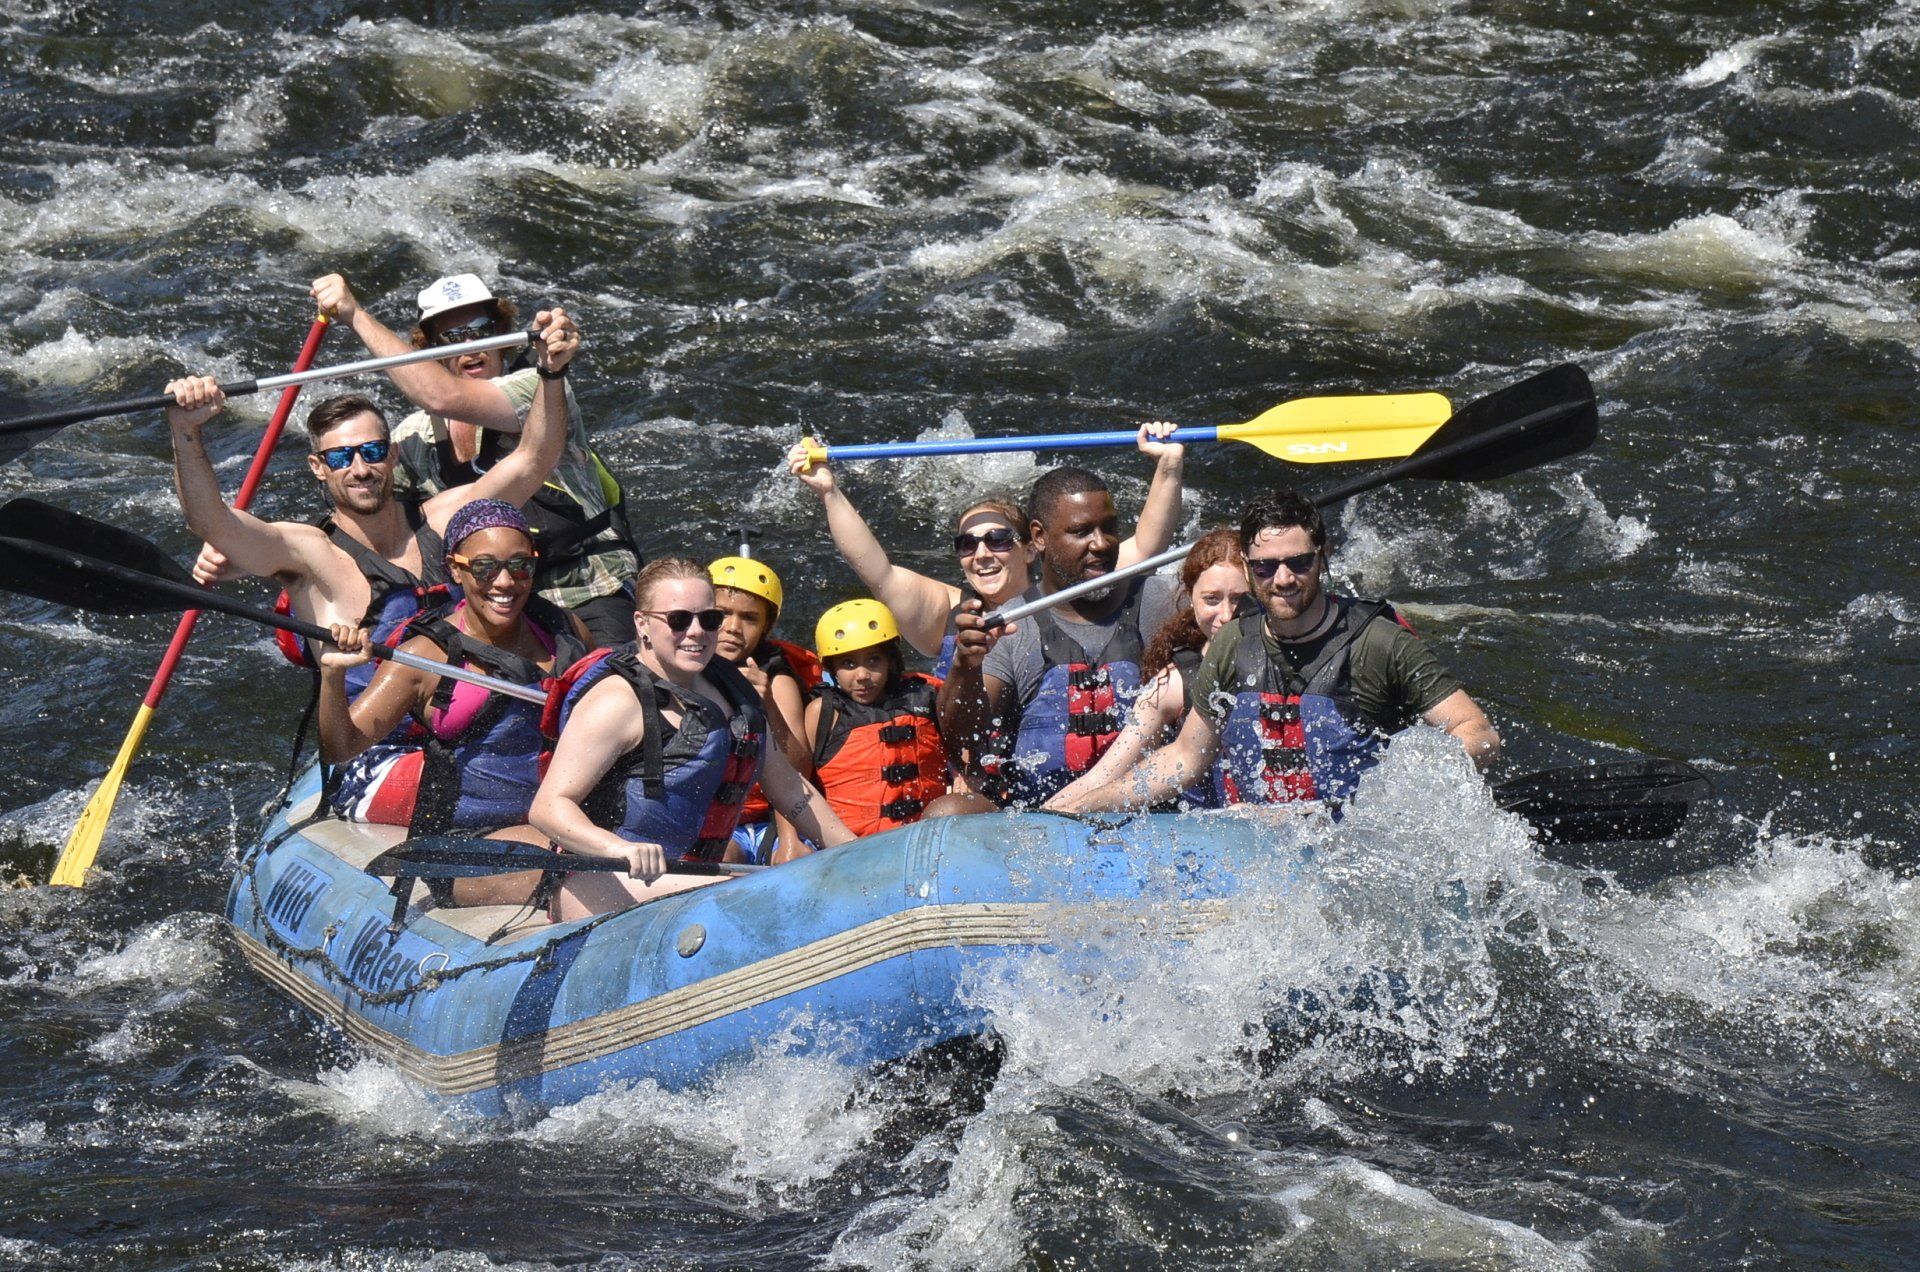 Group of people rafting in whitewater